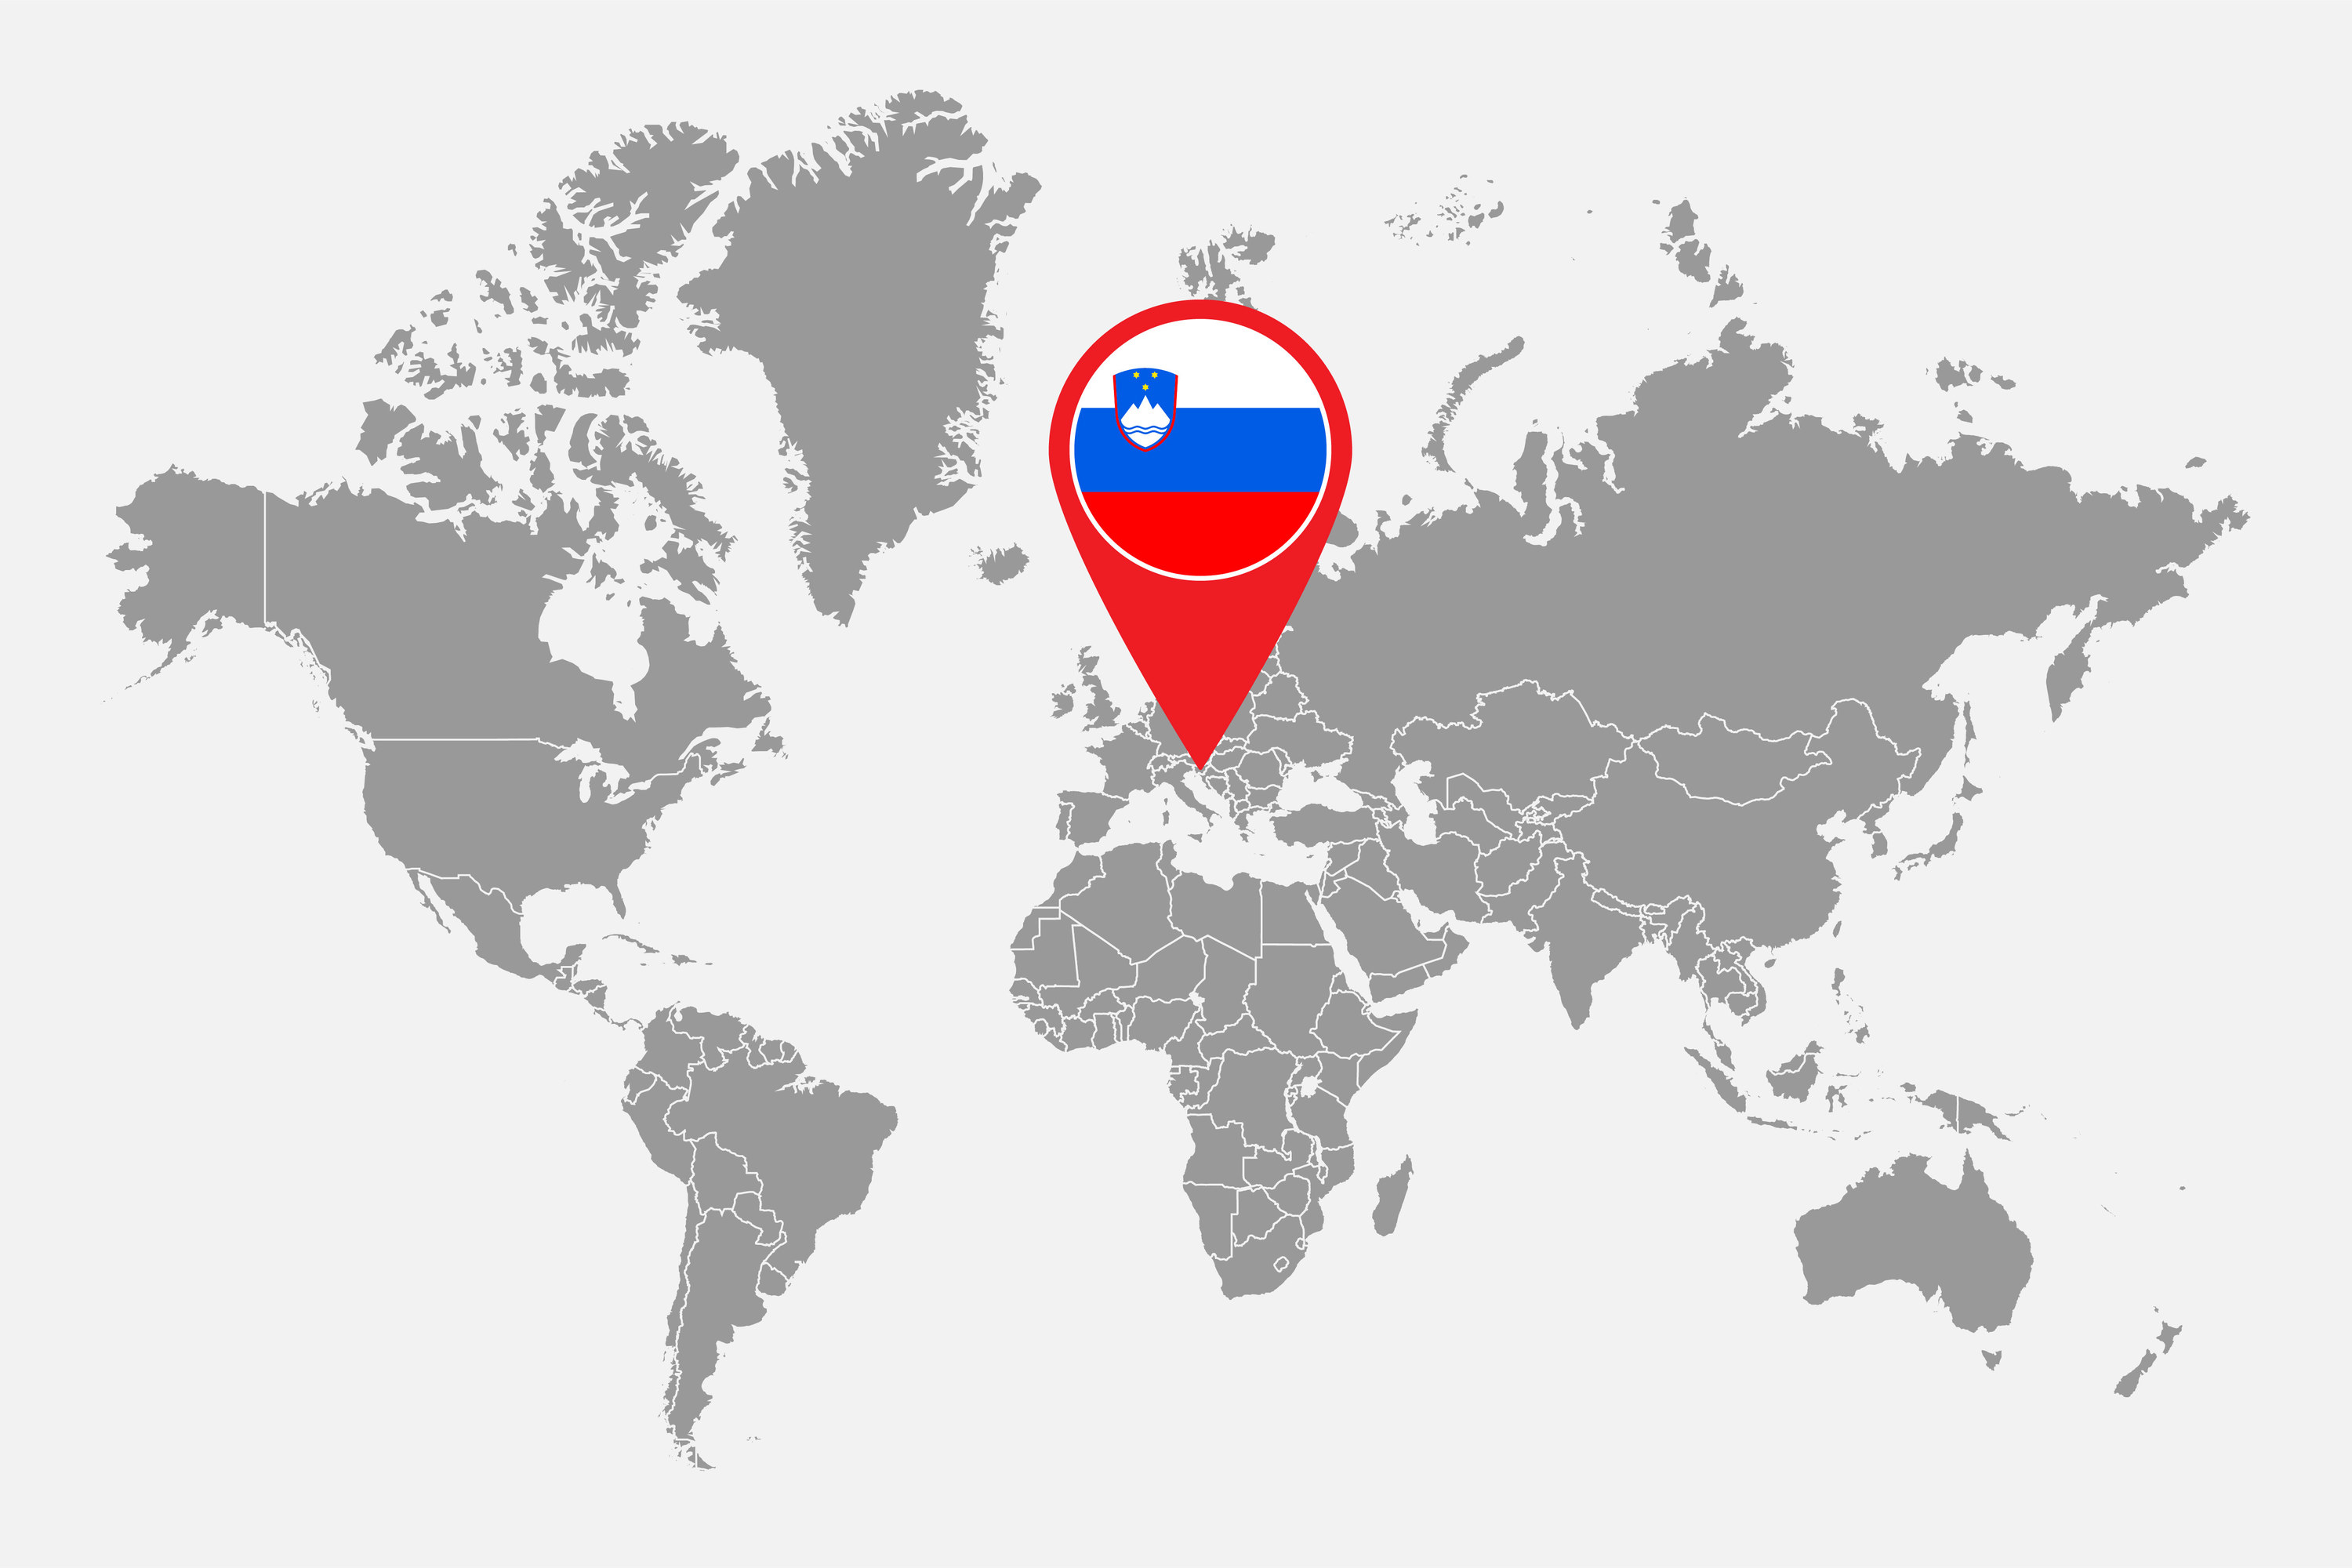 A world map with Slovenia indicated